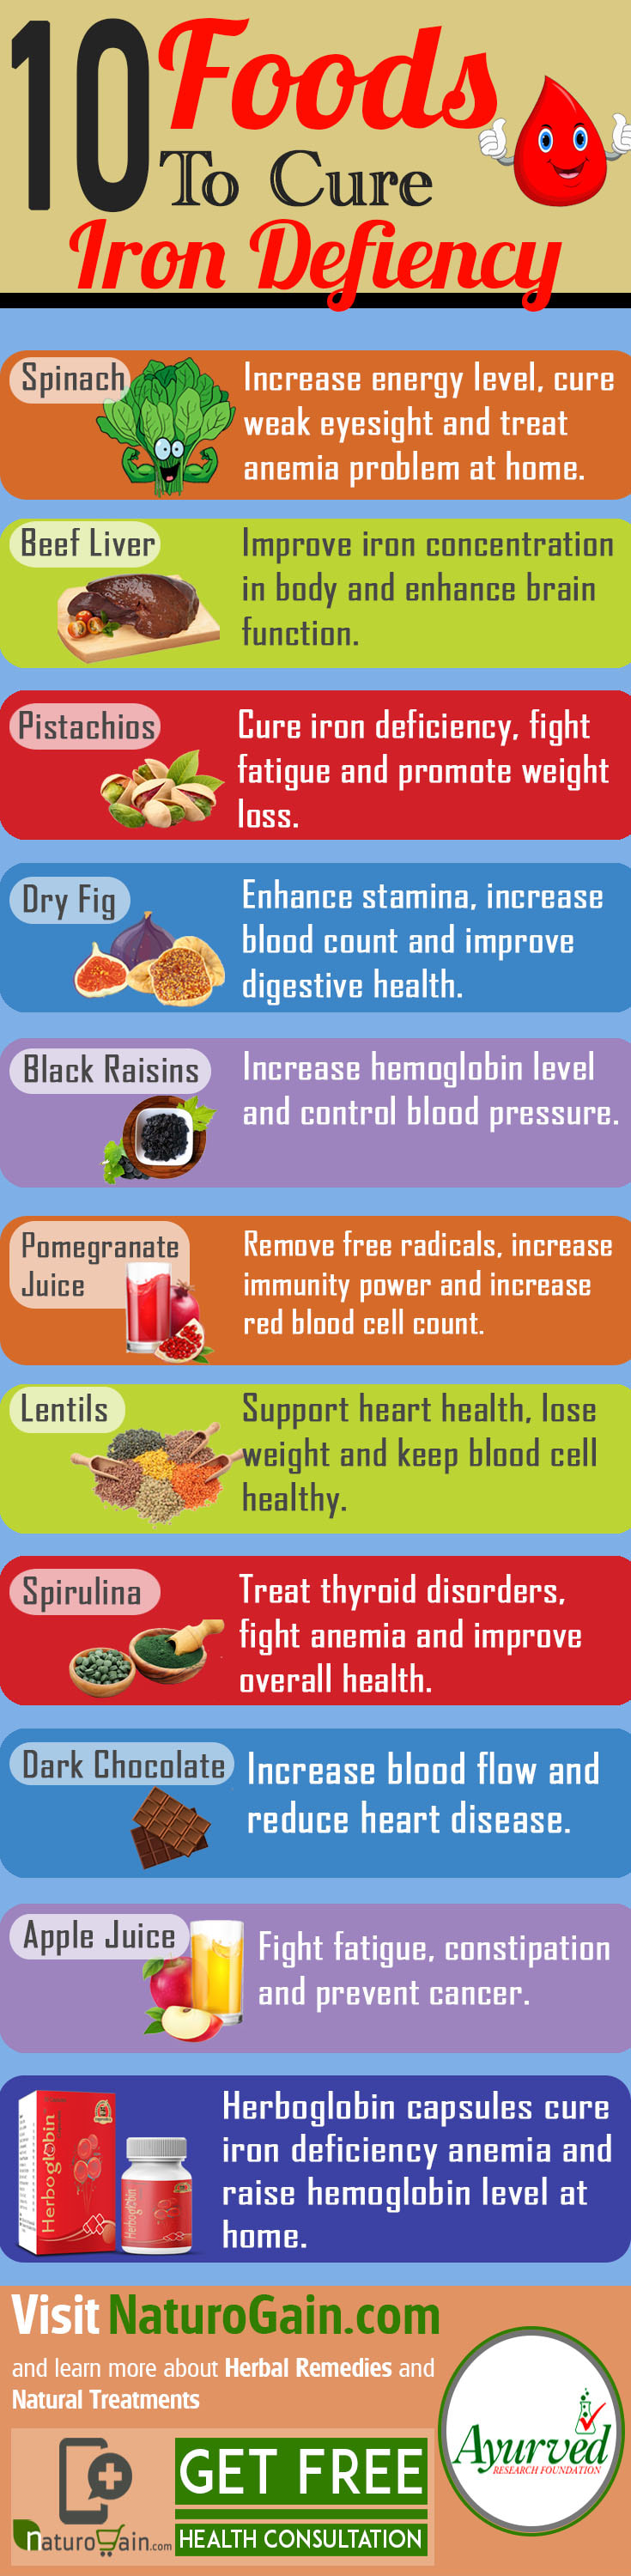 food-to-cure-iron-deficiency-infographic